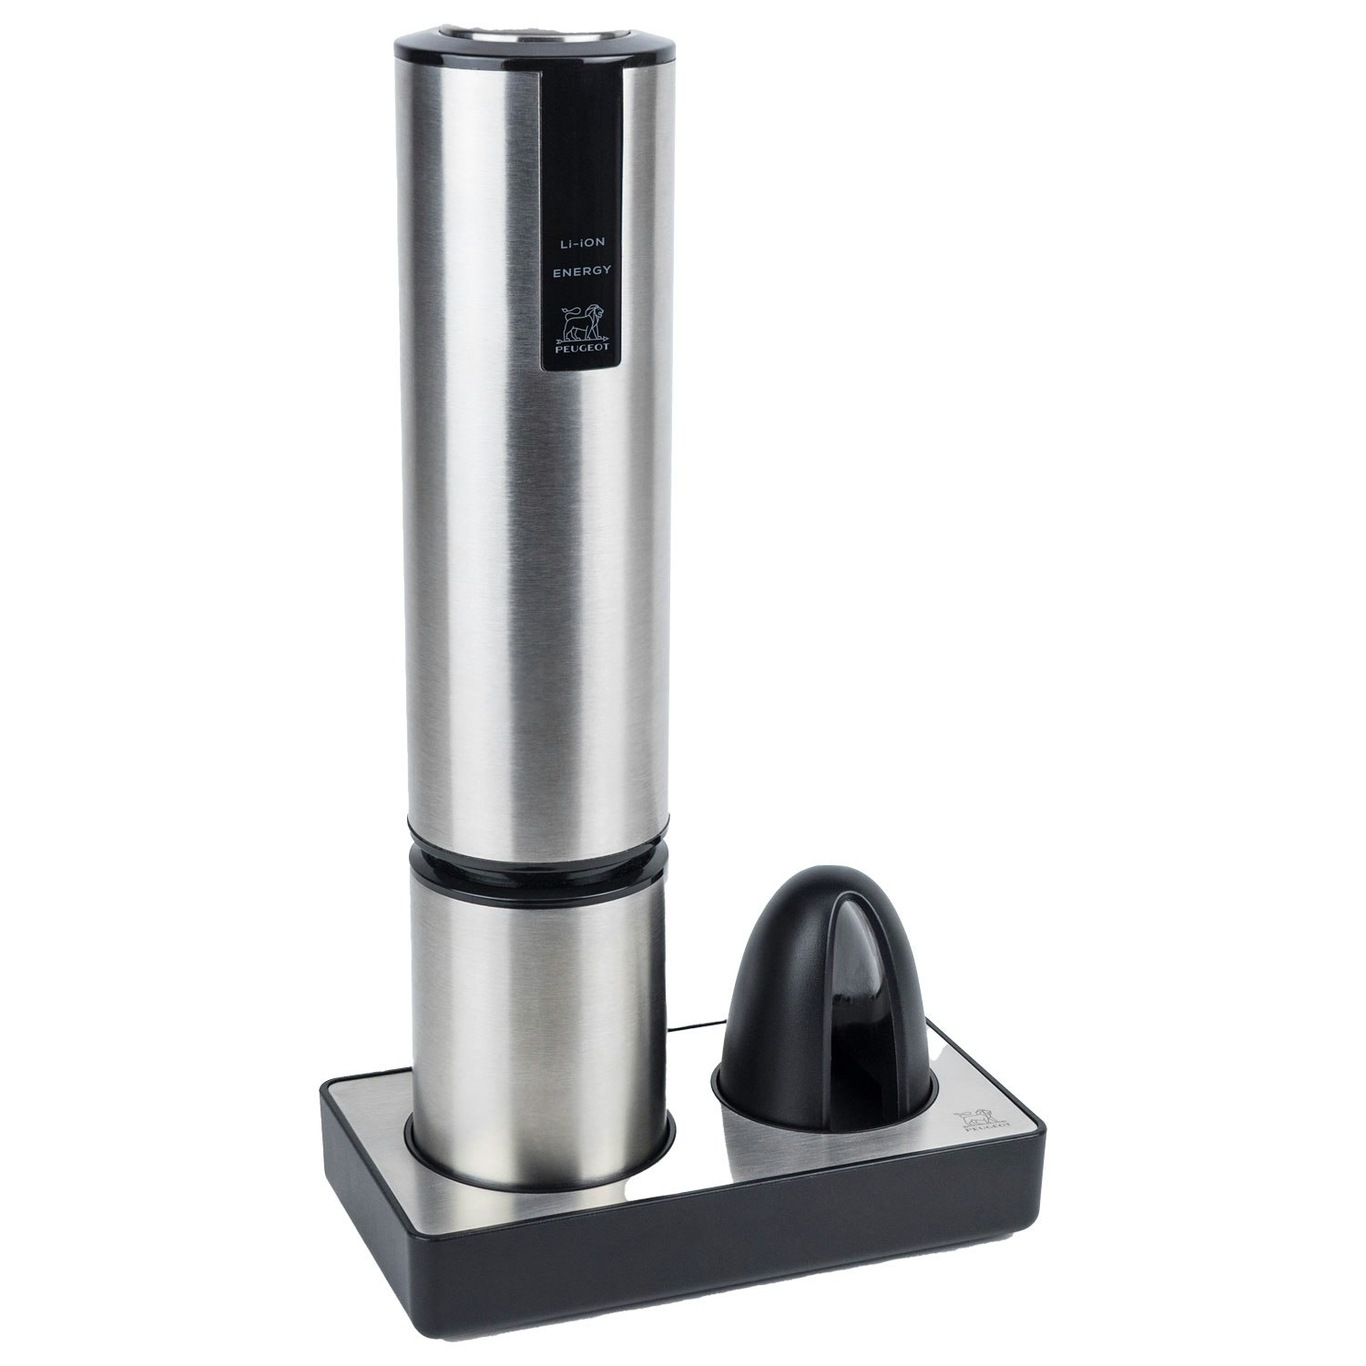 Elis sense U'select electric salt and pepper mills in stainless